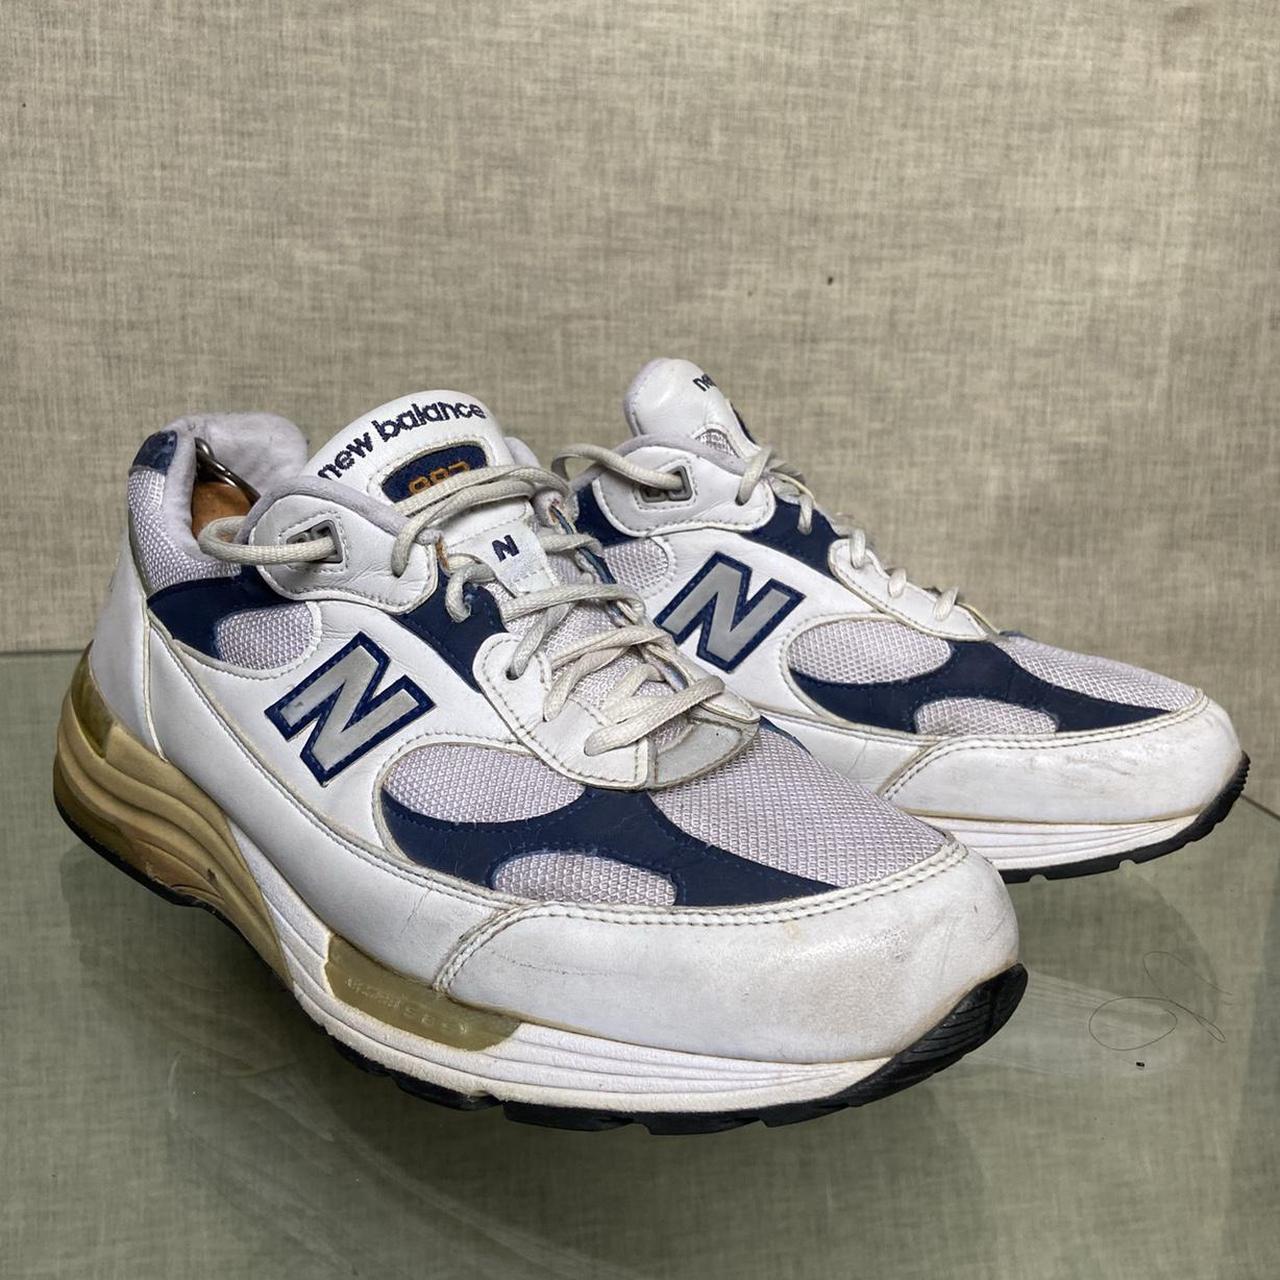 Product Image 2 - Vintage newbalance Made in USA